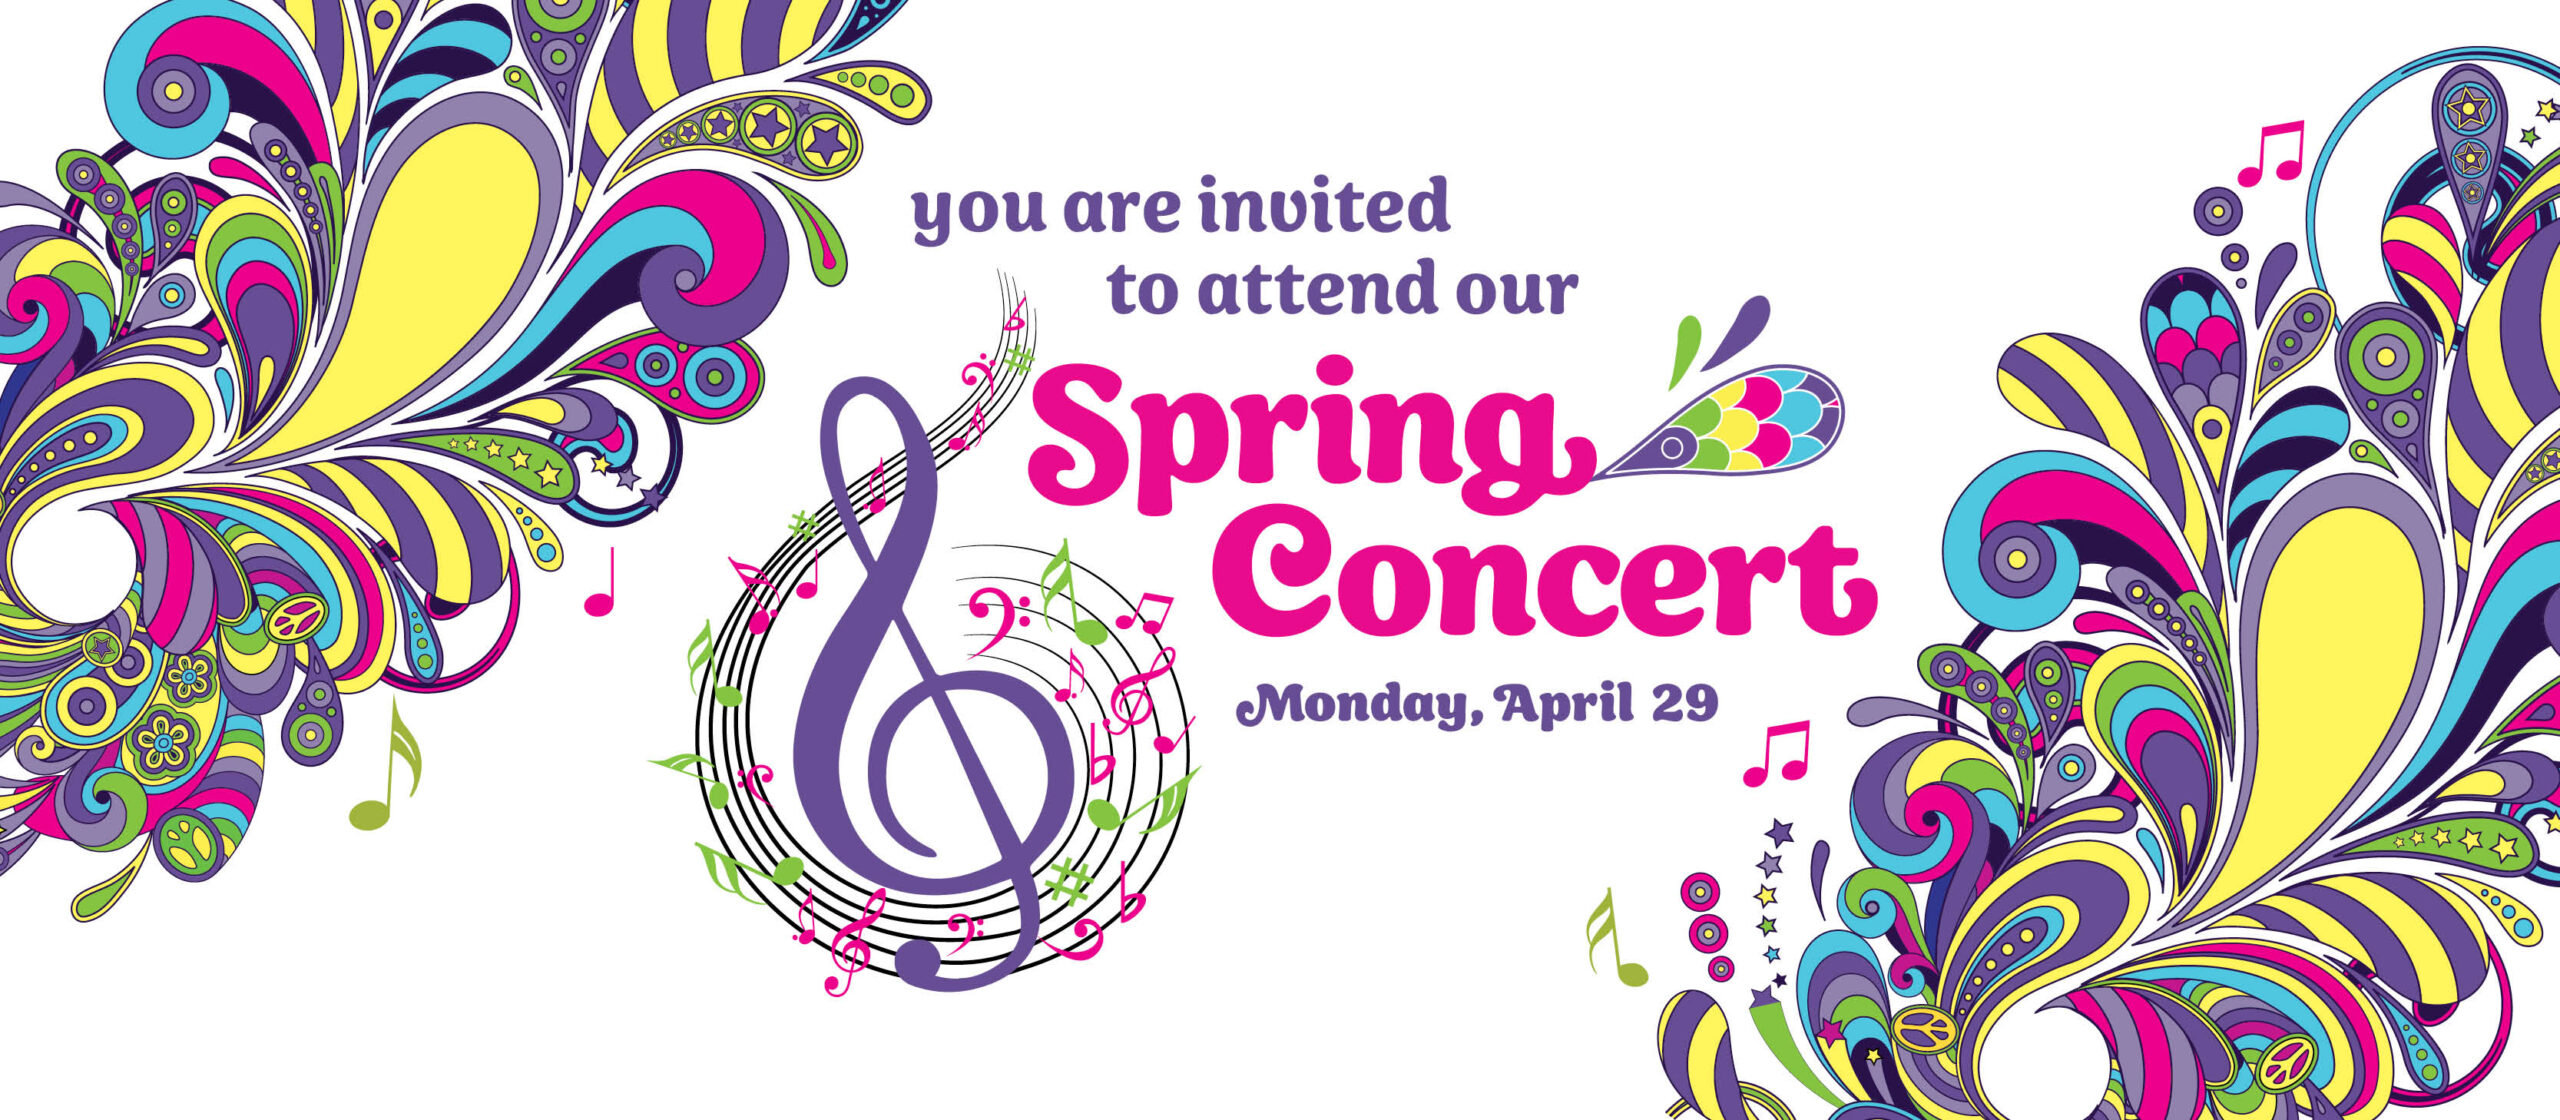 You are invited to attend our Spring Concert Monday, April 29